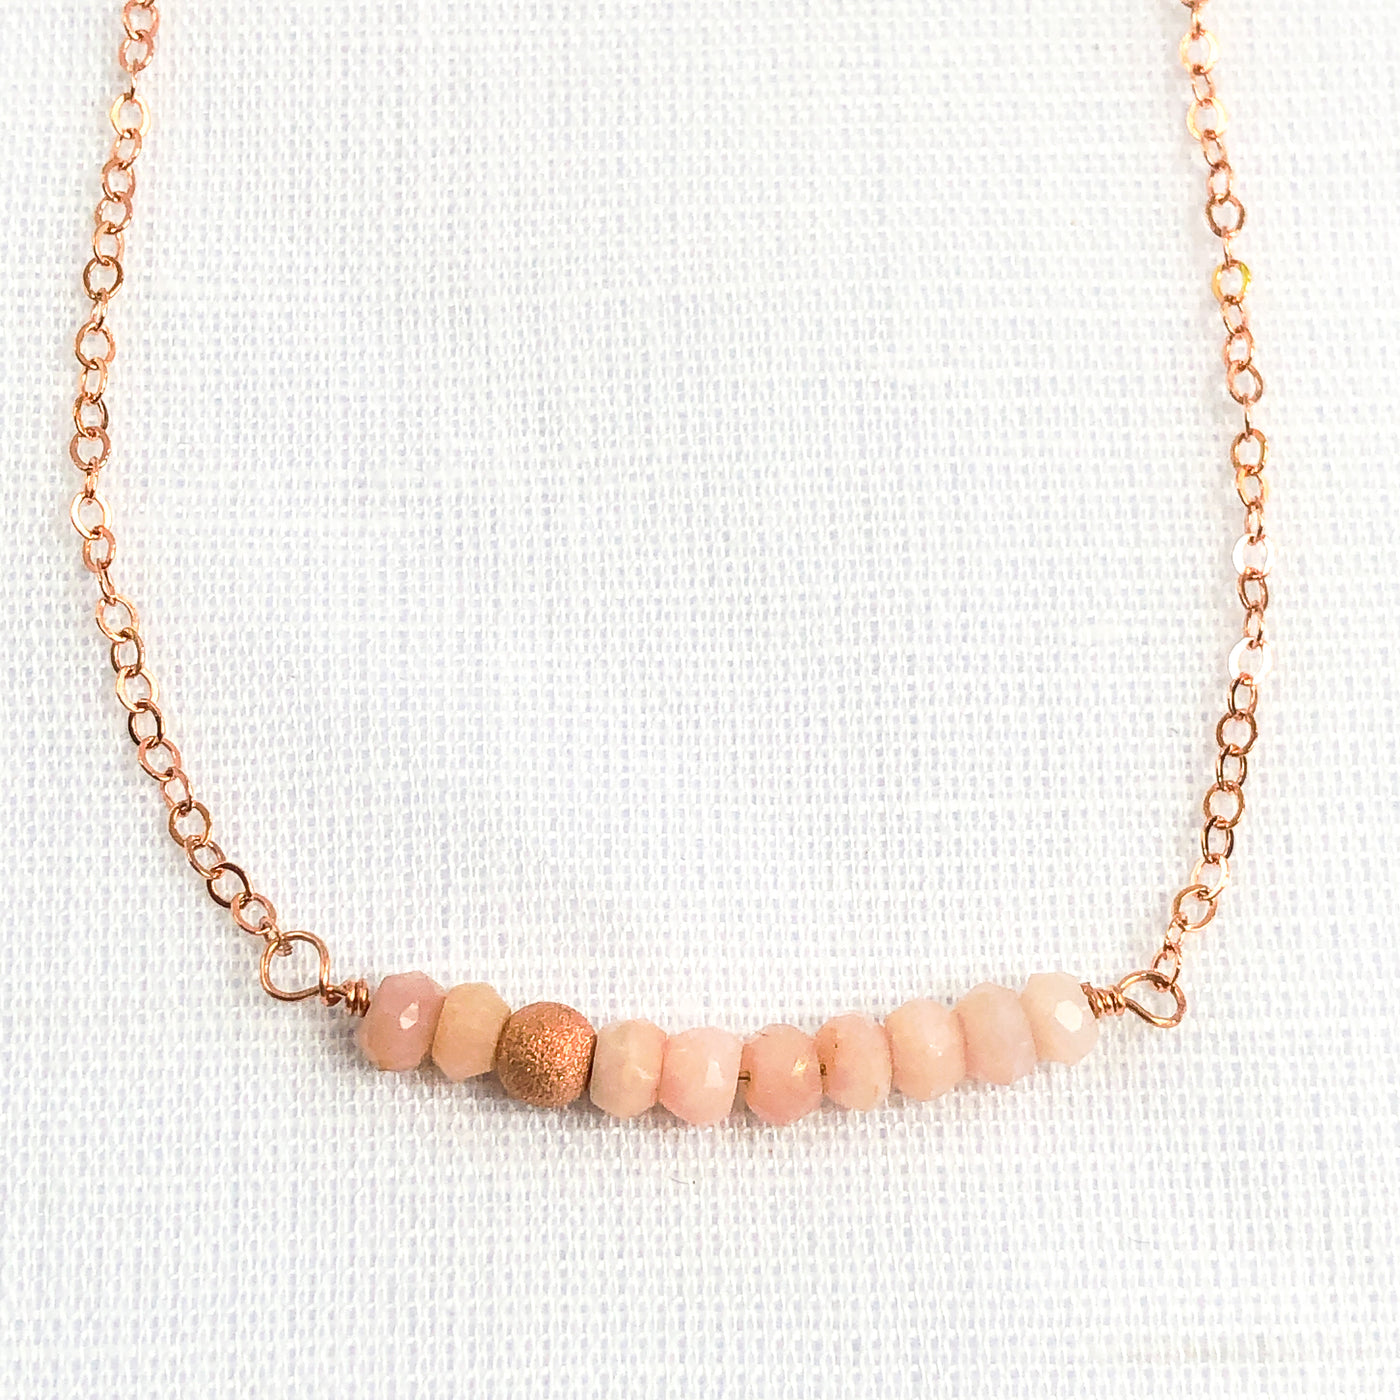 Delicate Pink Opal gemstone and Rose Gold-filled bar necklace. Perfect alone or for layering. The shine of the Rose Gold stardust bead compliments the opals nicely and gives the necklace an air of sophistication. Closeup view. Handcrafted.